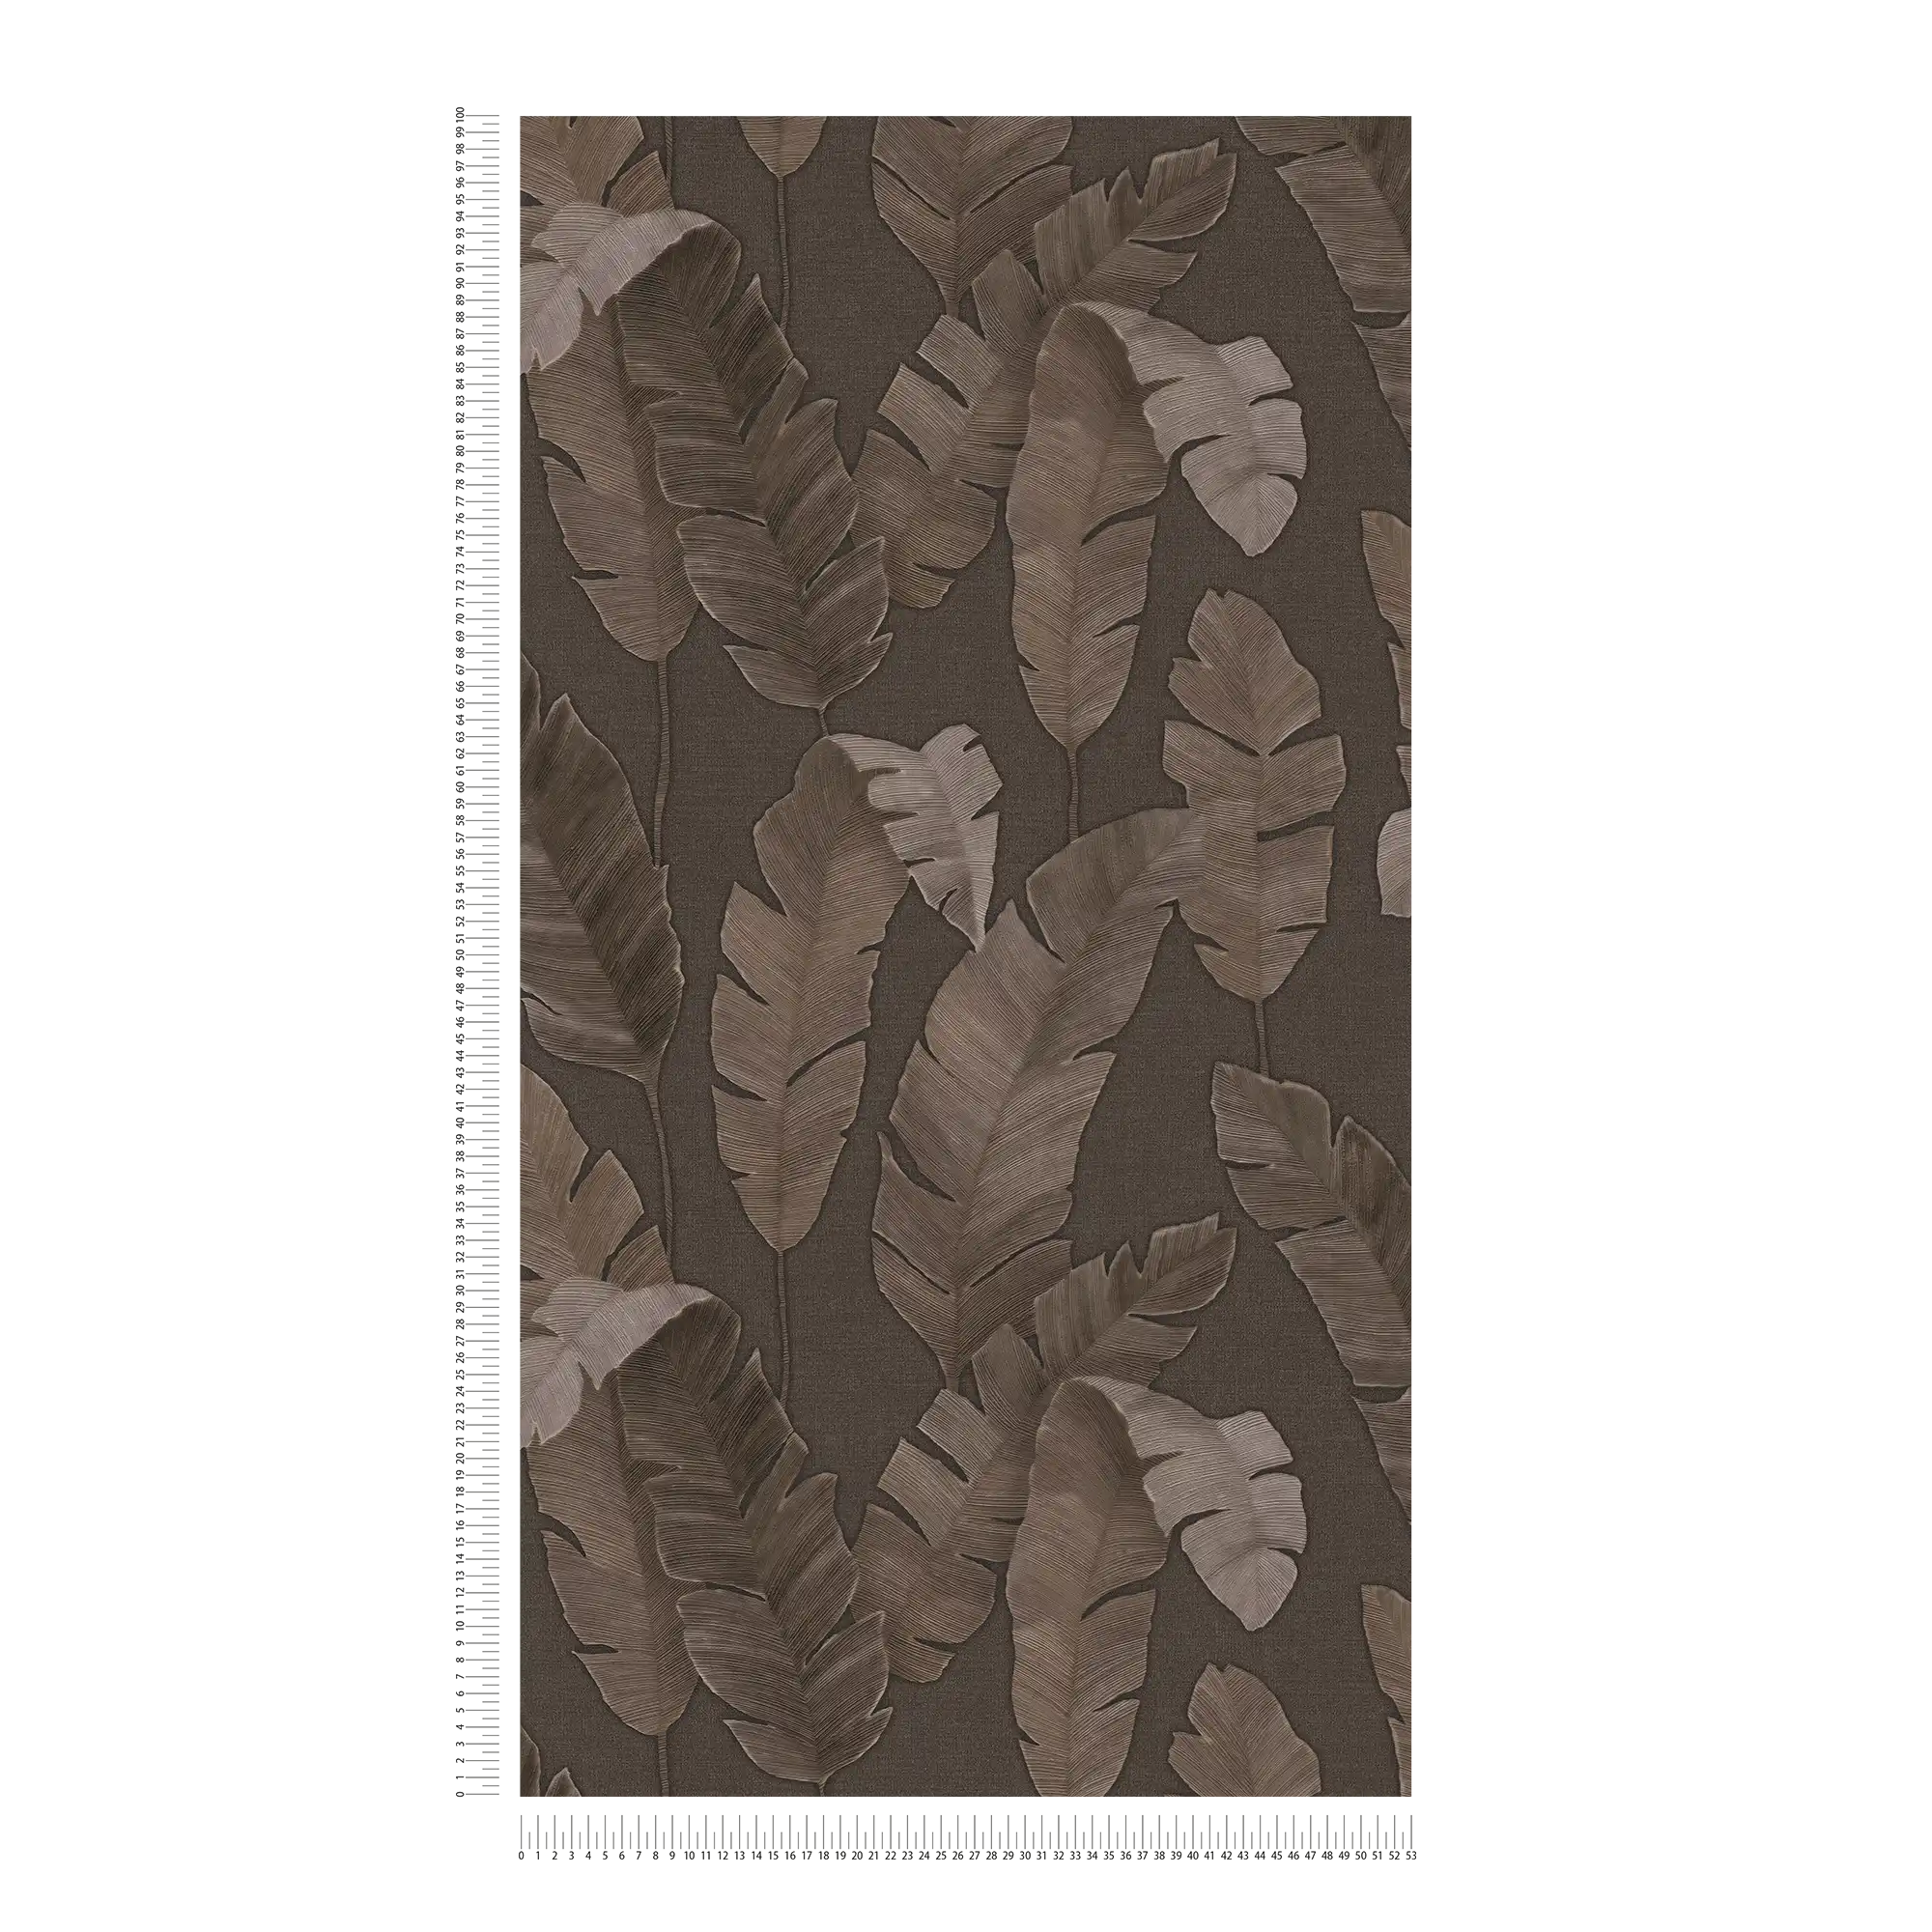             Jungle Wallpaper with Light Shiny Palm Leaves - Brown
        